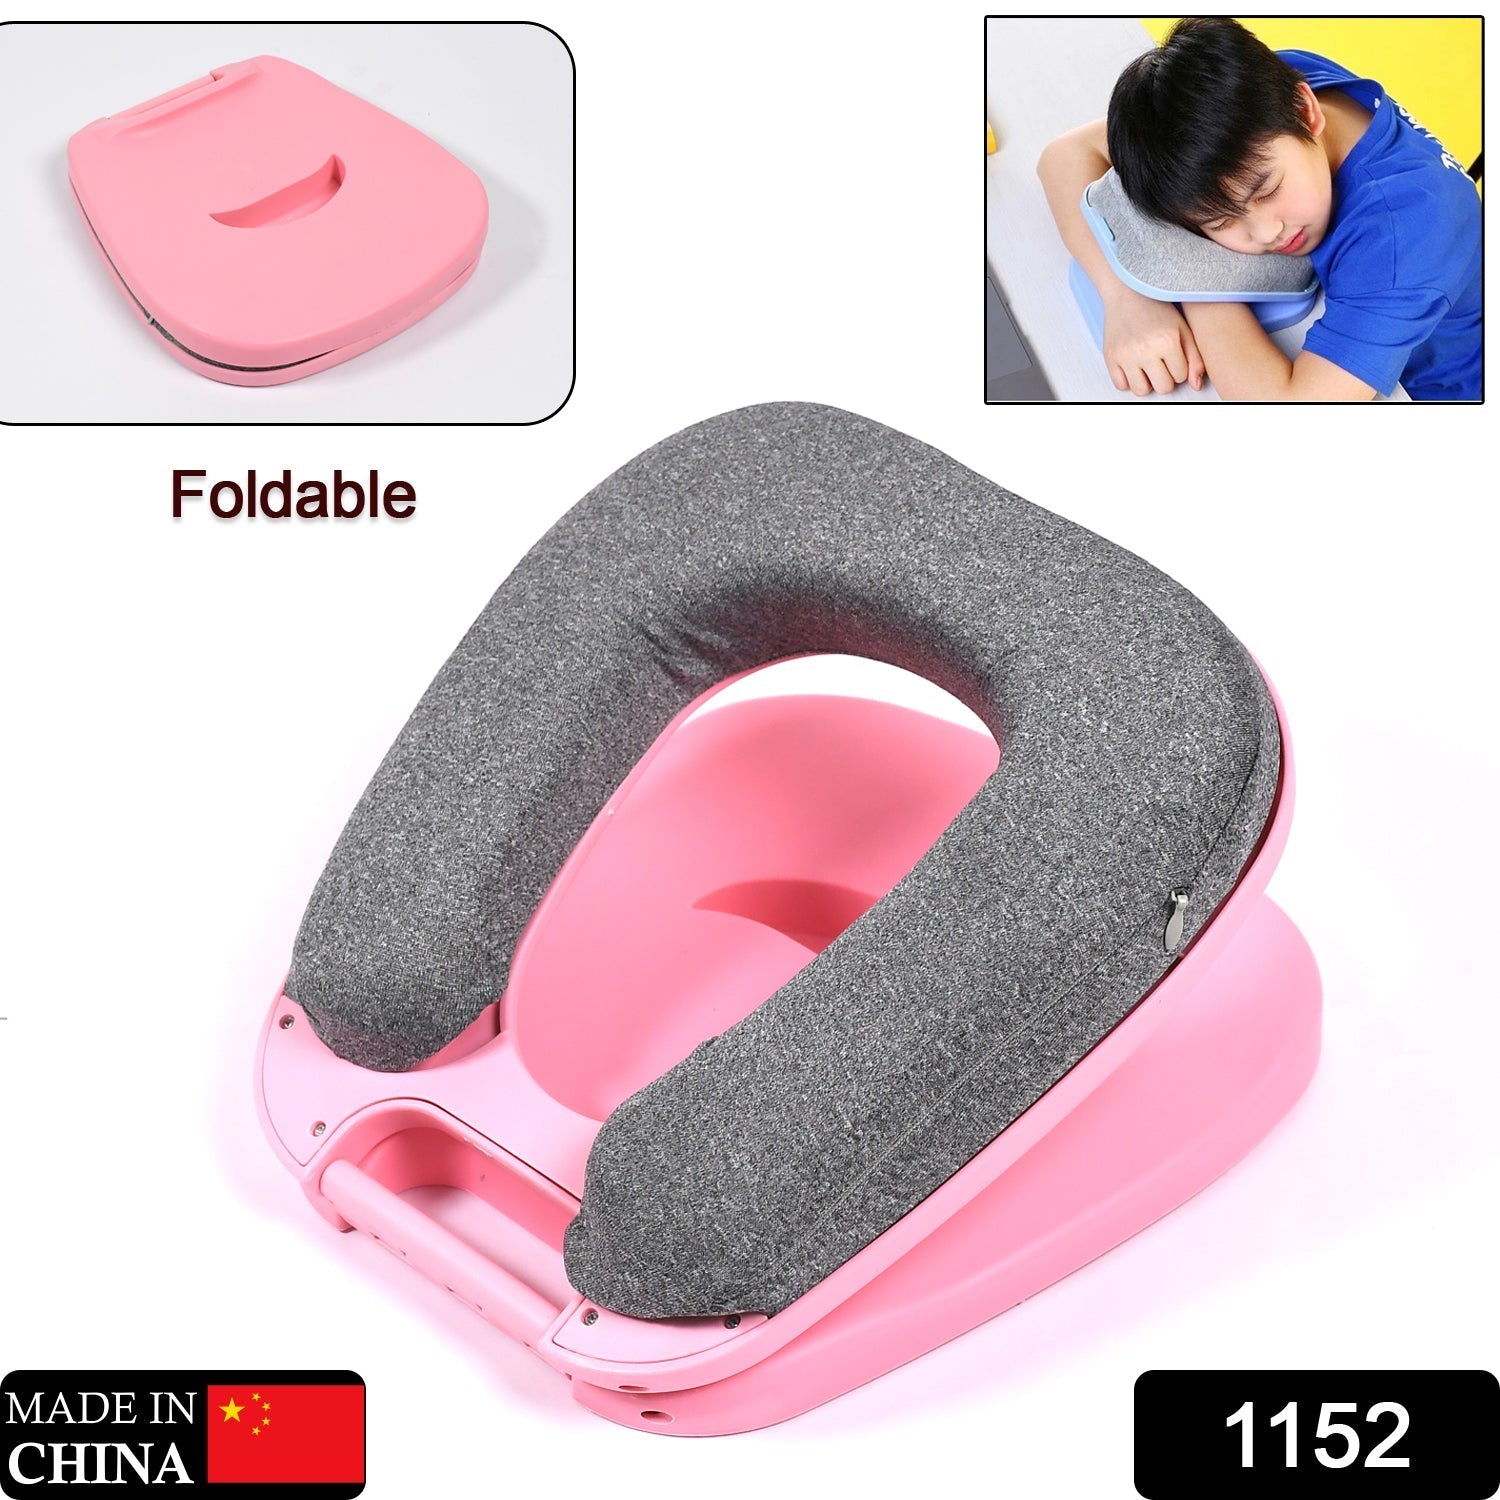 1152 Office Desk Pillow Foldable School Desk Pillow For Office Workers and Home Table DeoDap